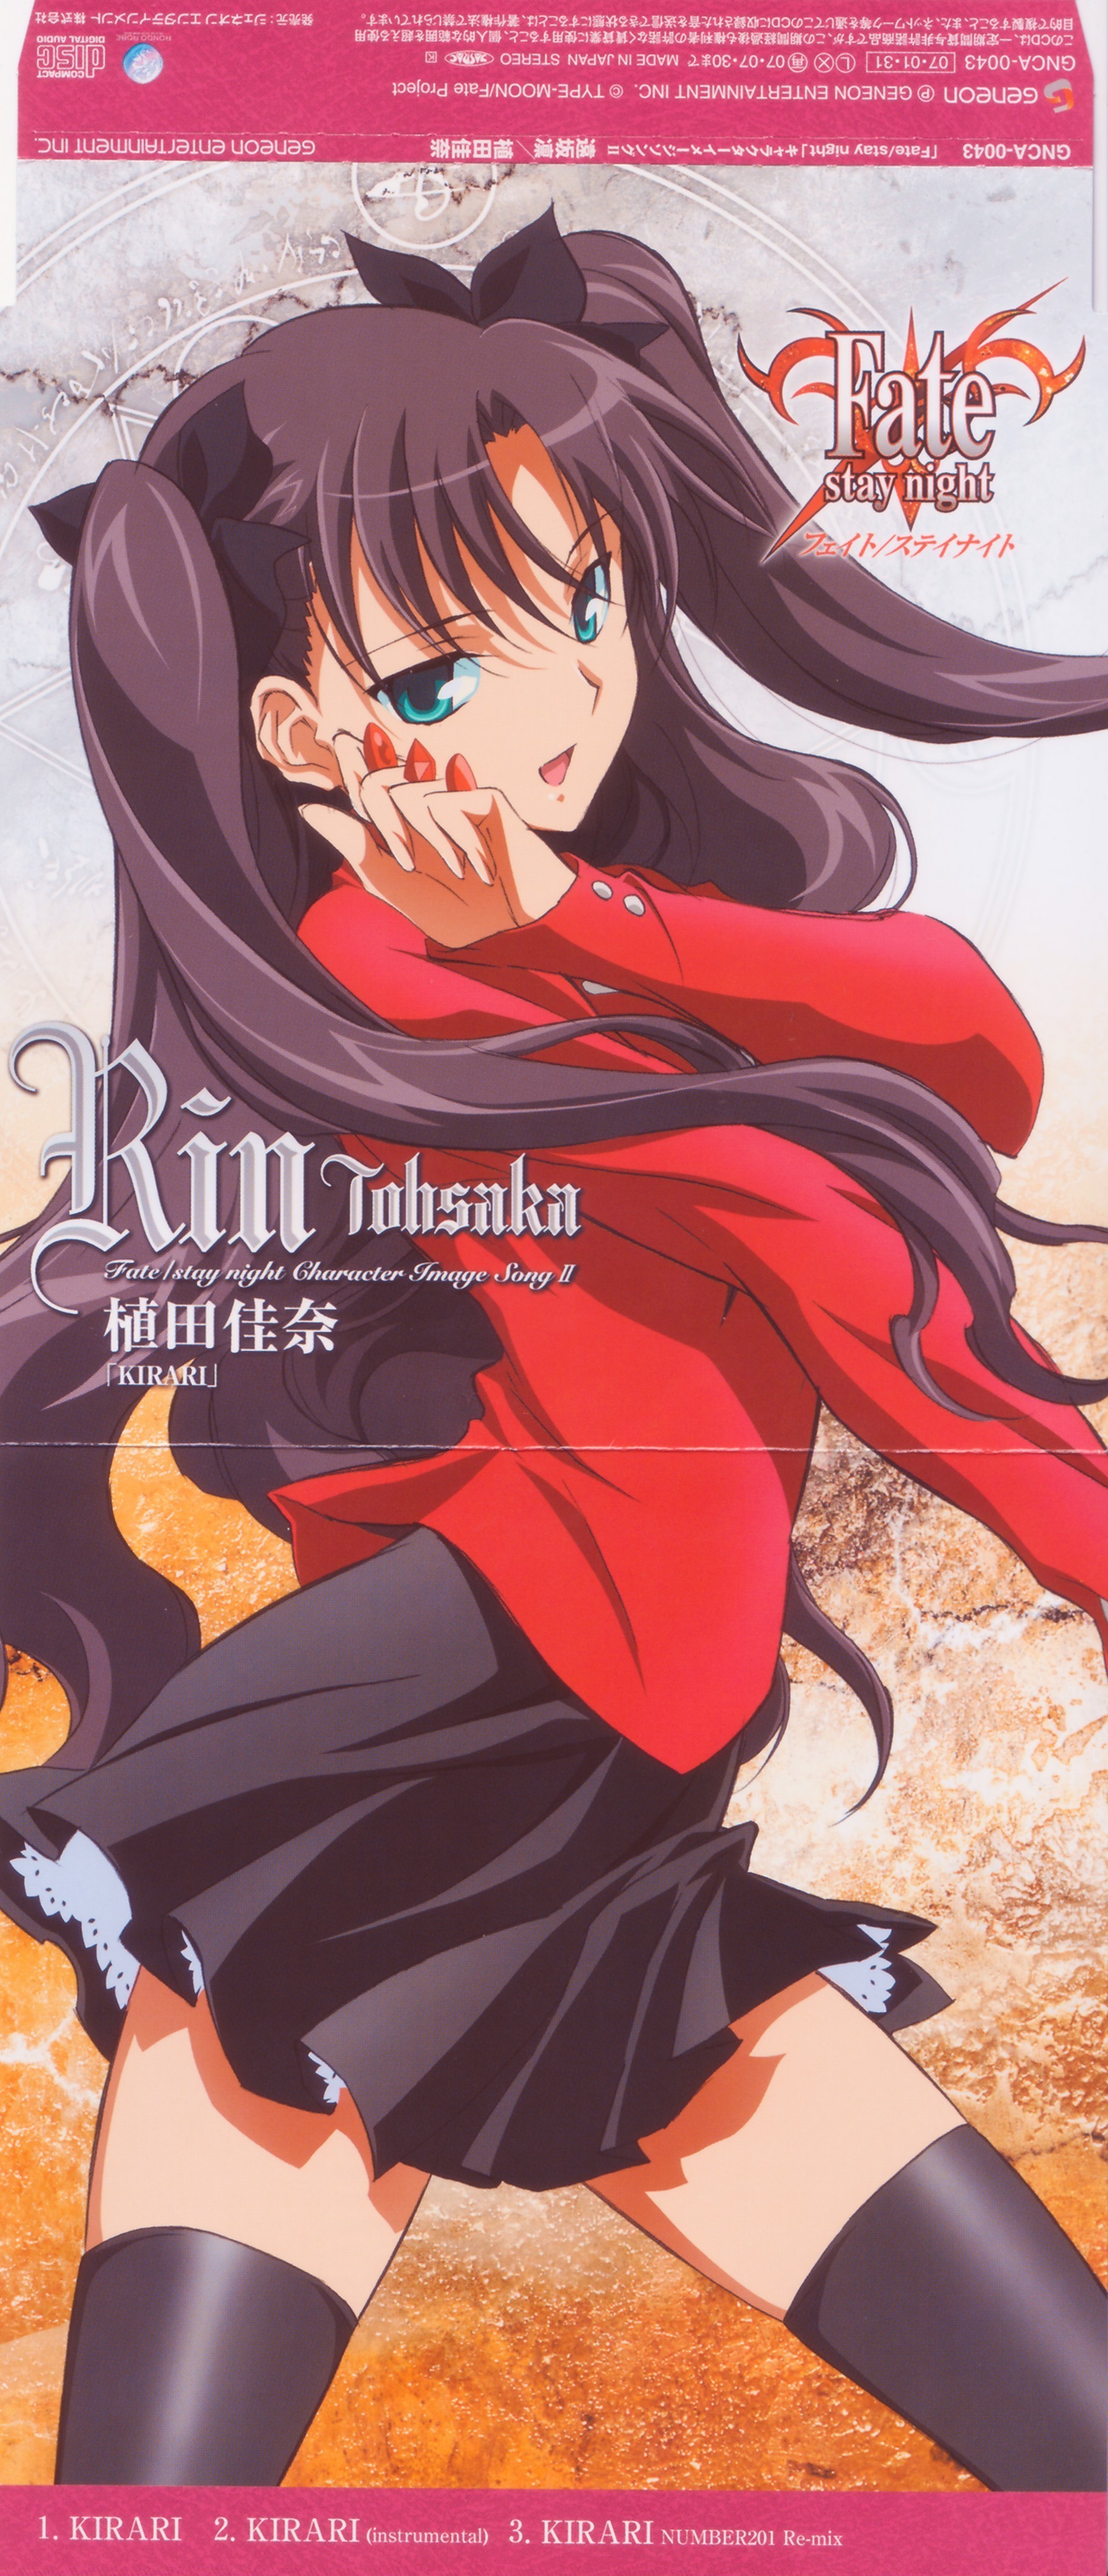 Fate Stay Night Album Song Fate Stay Night Fanpop Page 72